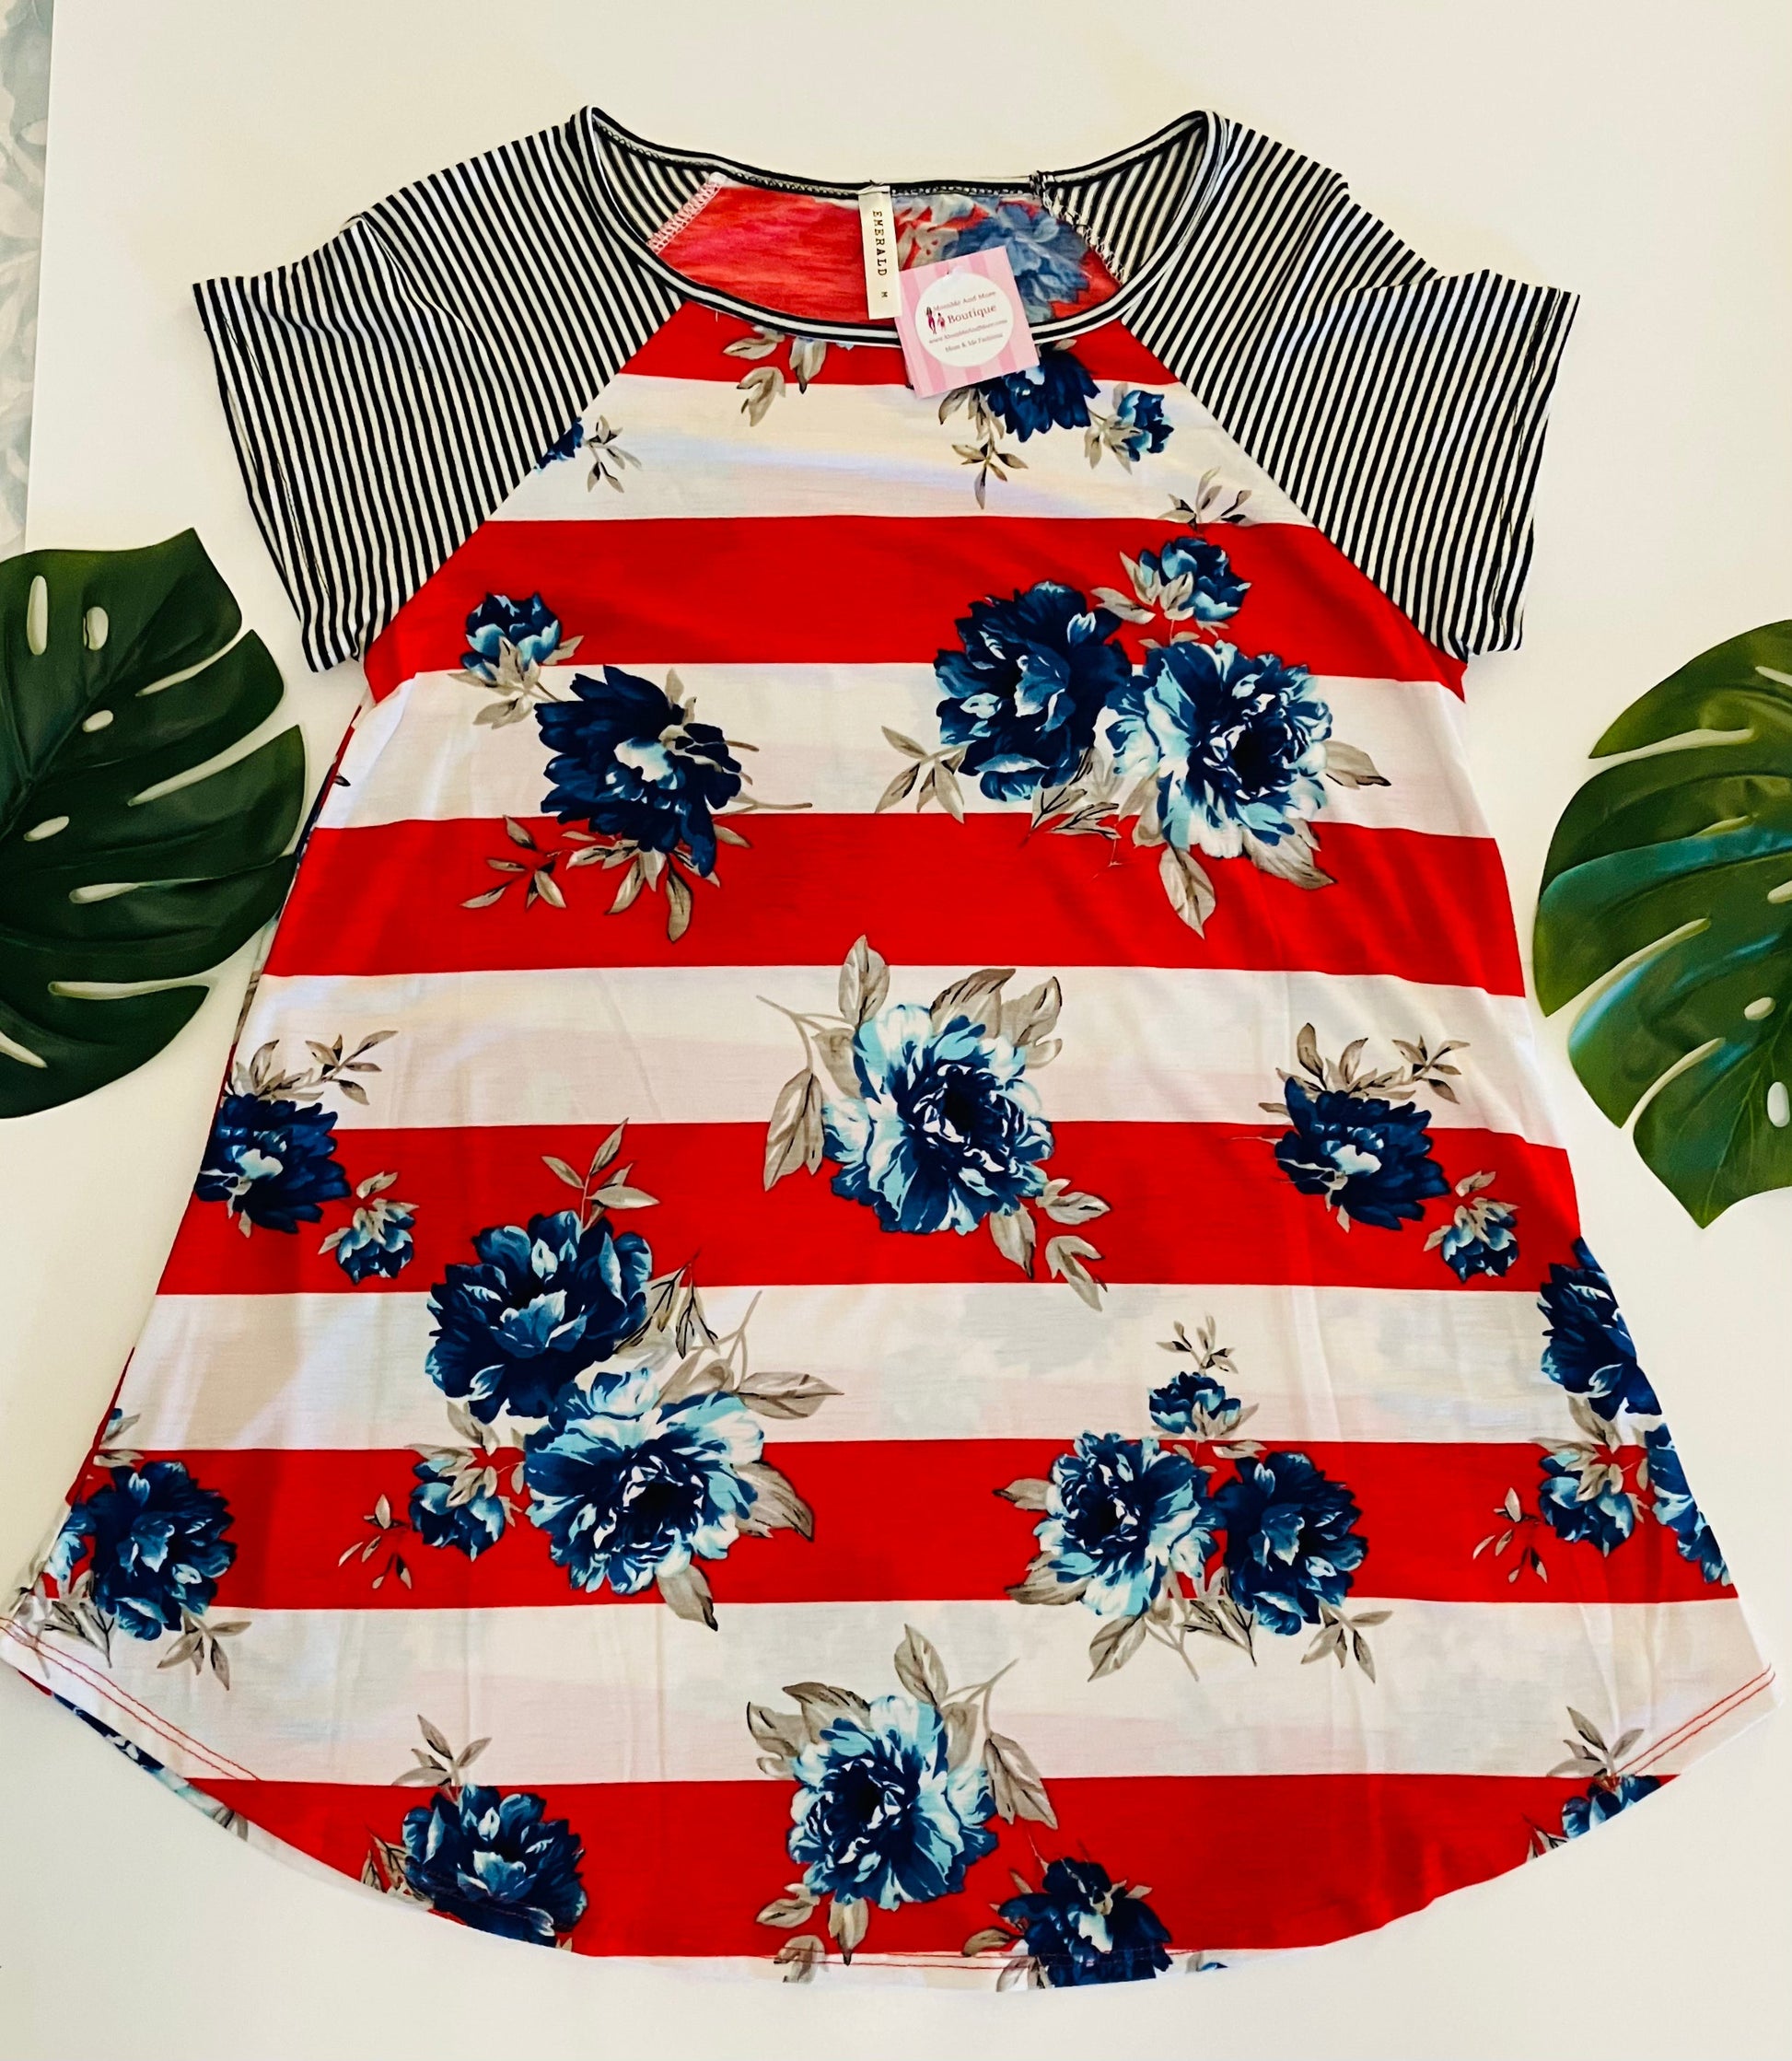 Womens Plus Size Red White Blue Top | Short Sleeve Shirt | Floral Striped Tunic | 4th of July Shirt Tops MomMe and More 